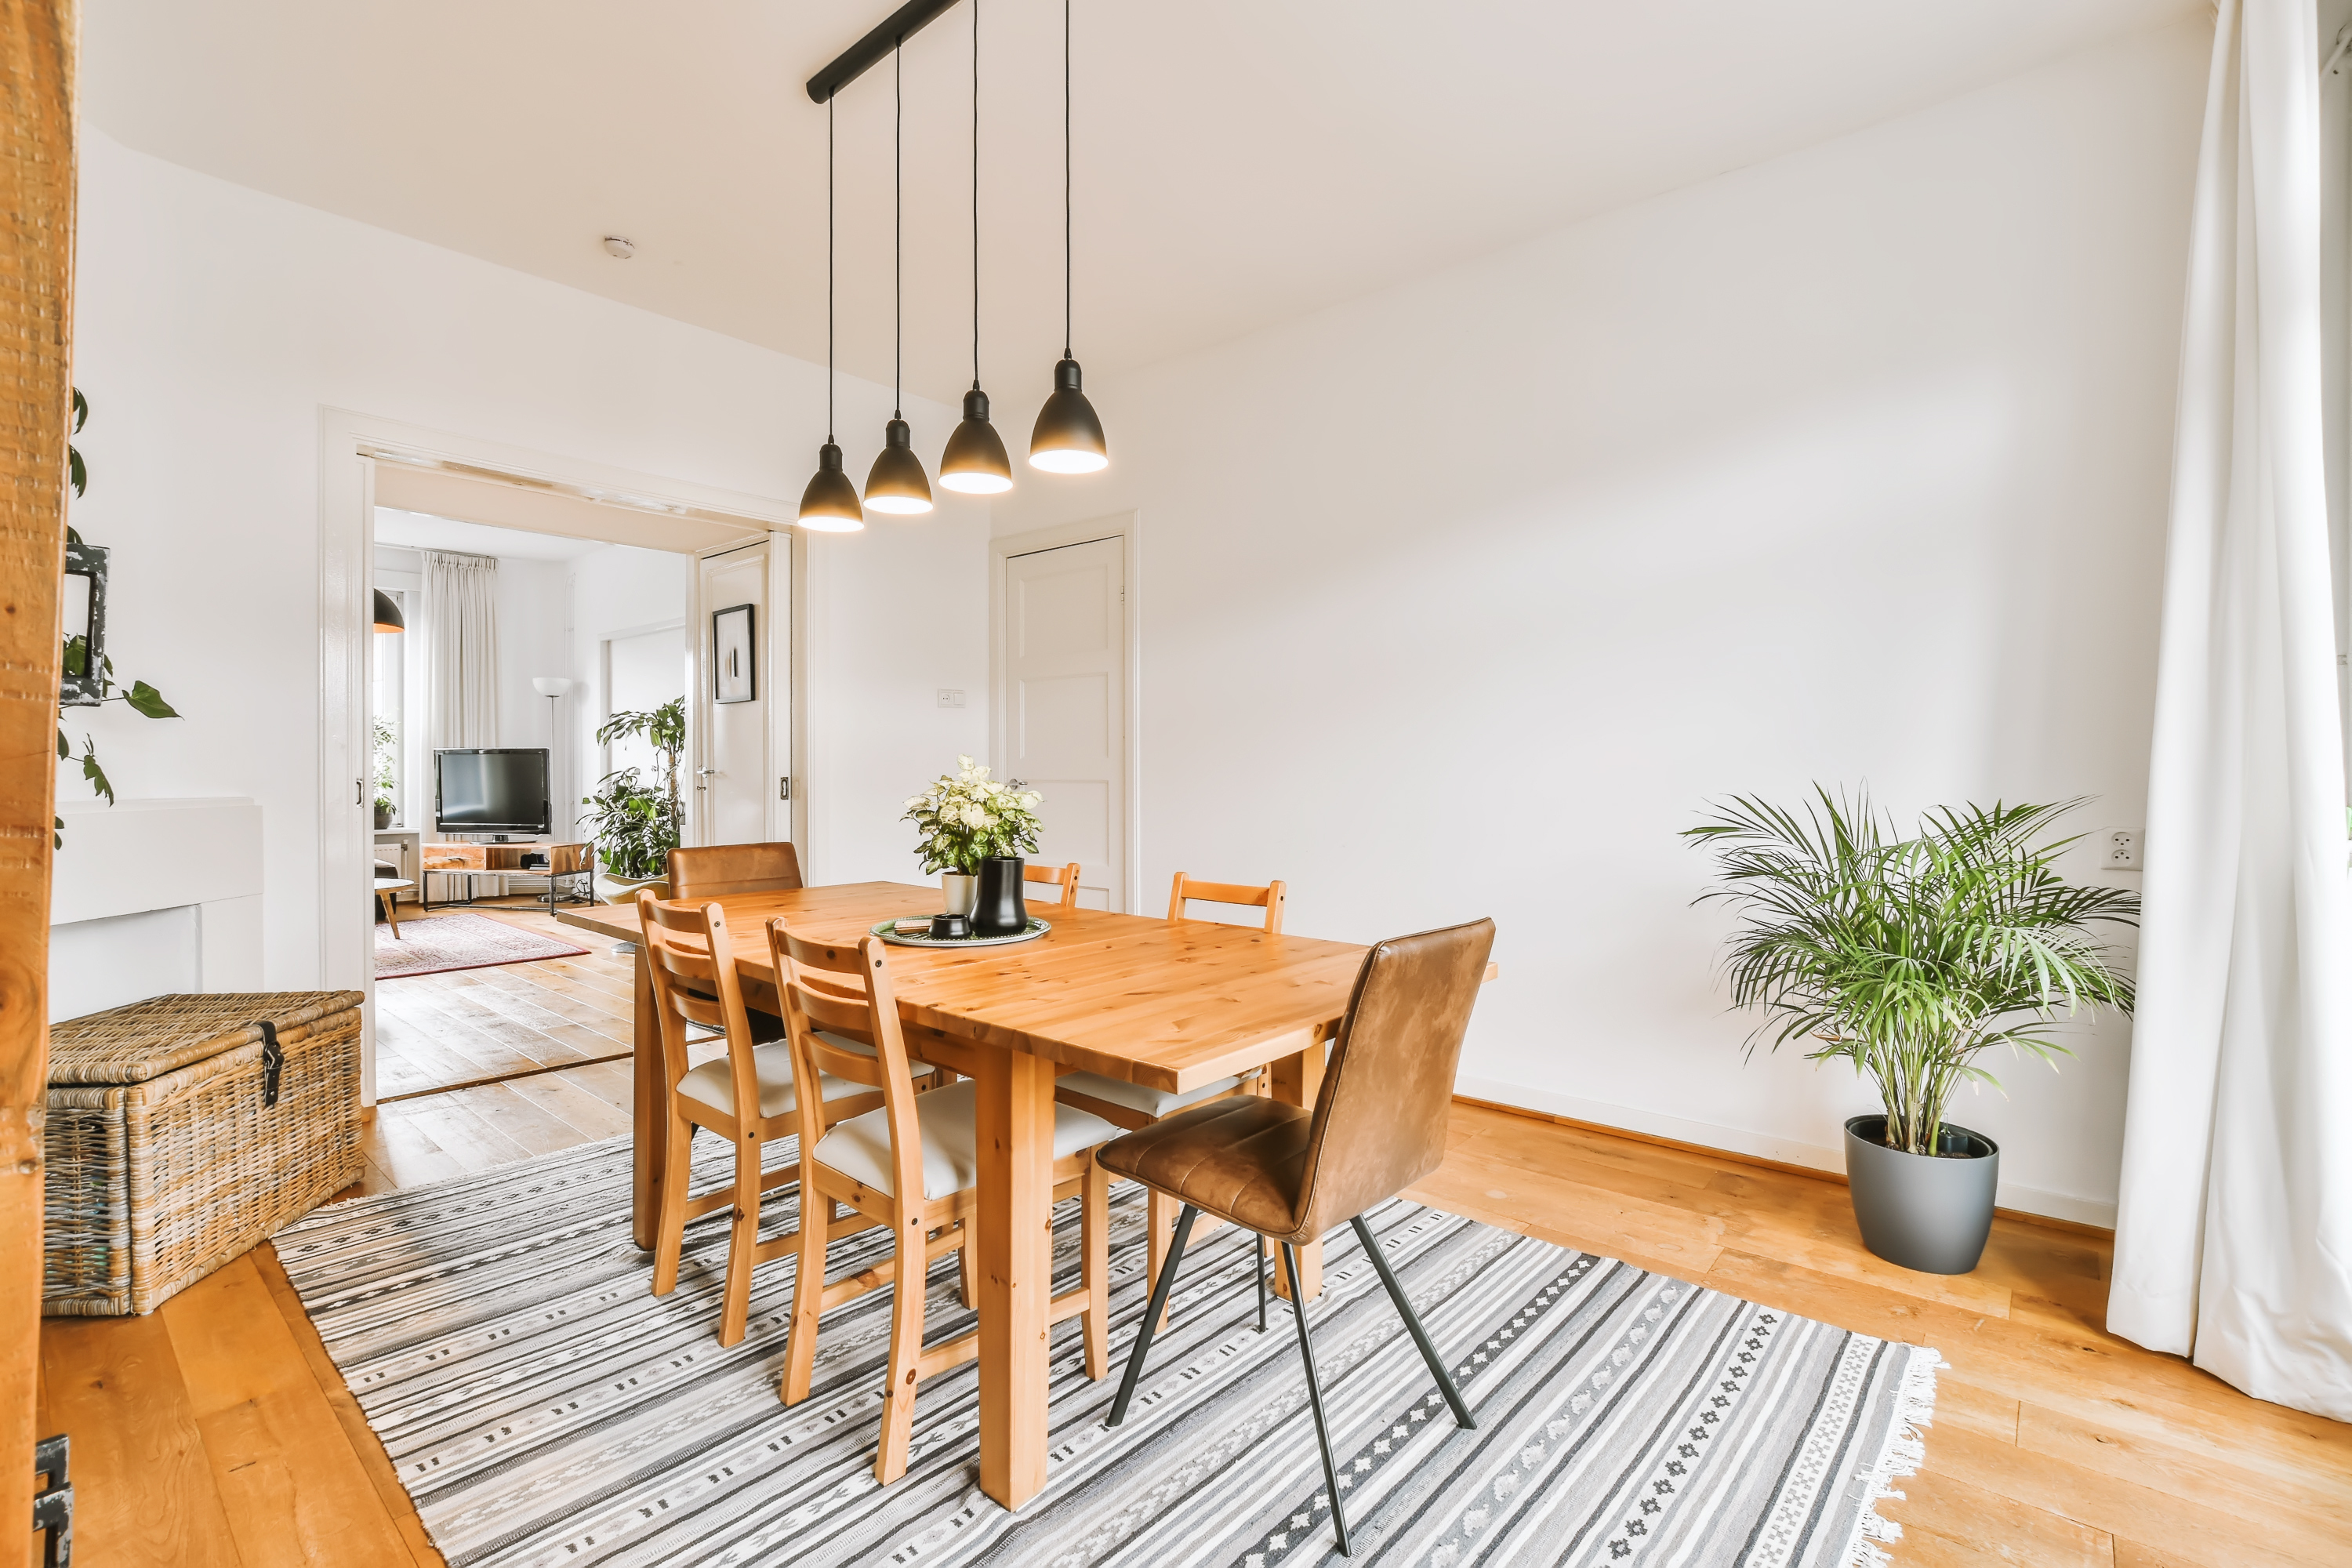 Dining room with a wooden table, seats, a plant, and a striped rug